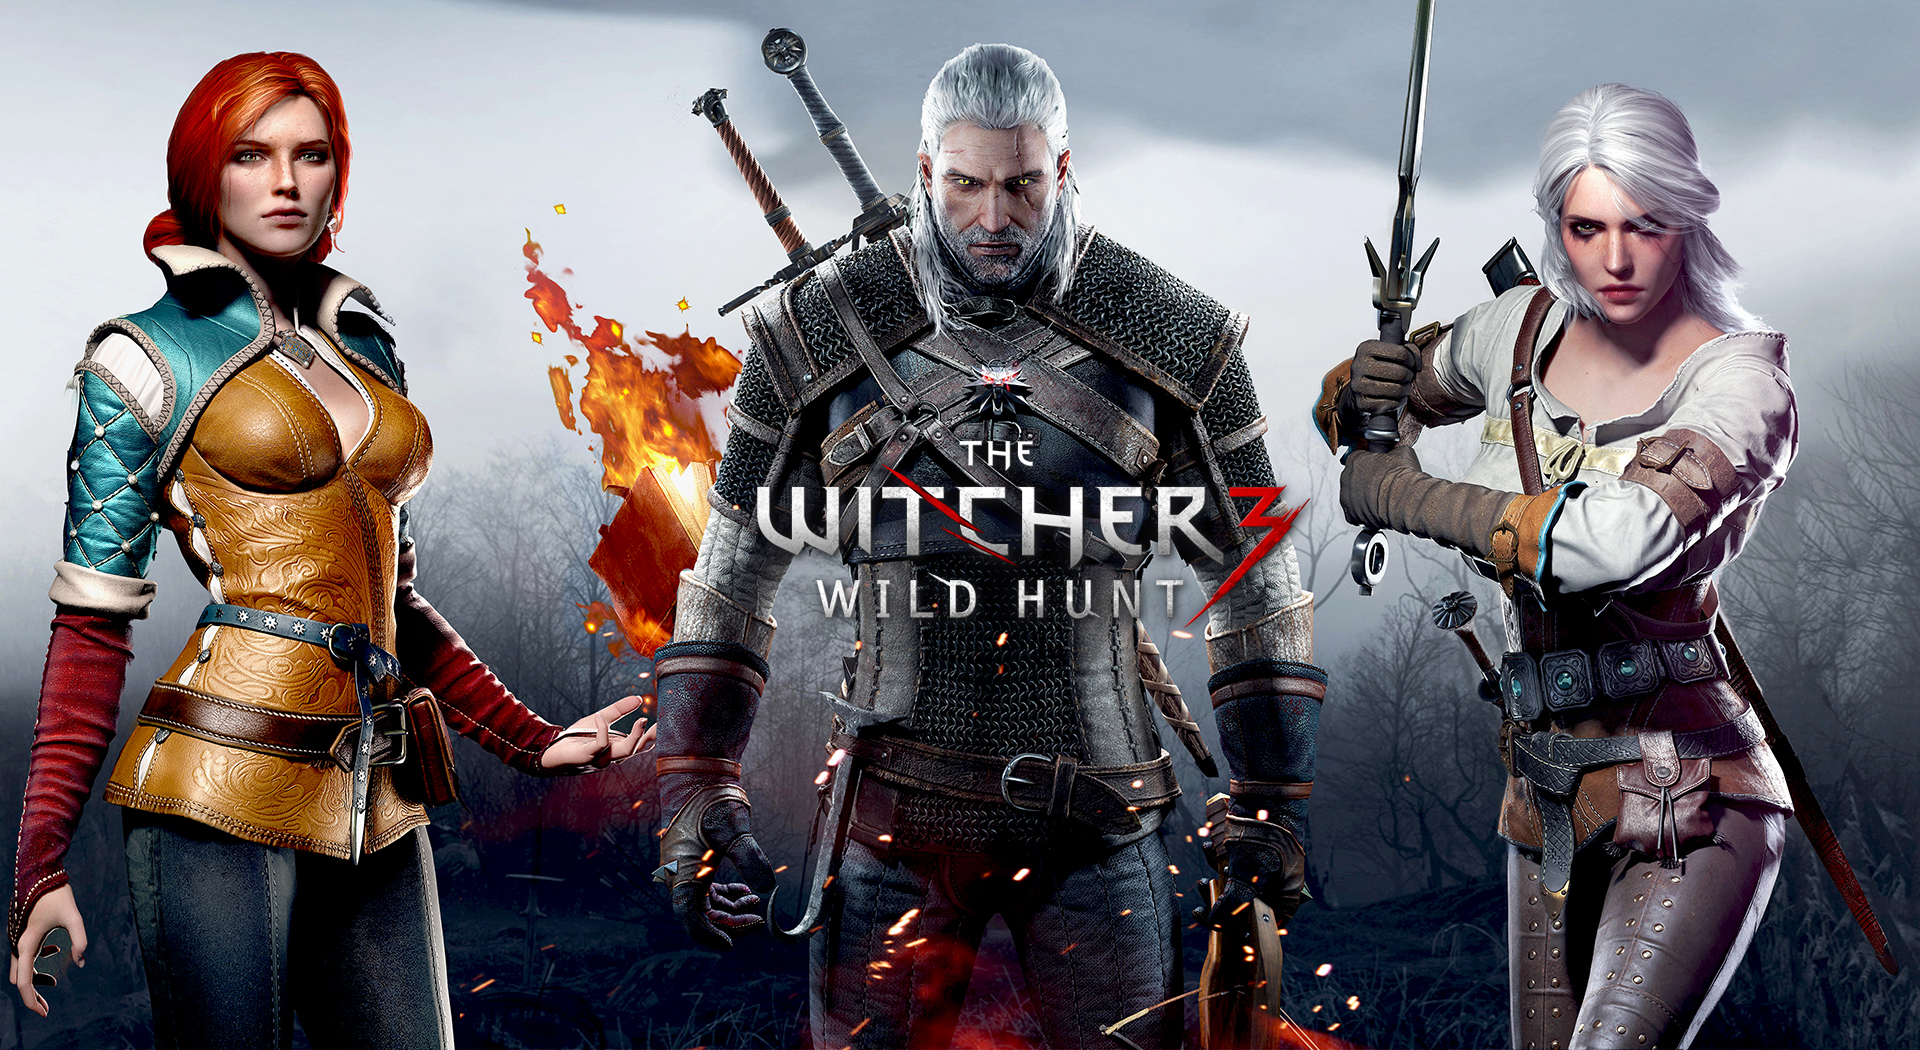  47 The Witcher 3 Wallpapers WallpaperSafari